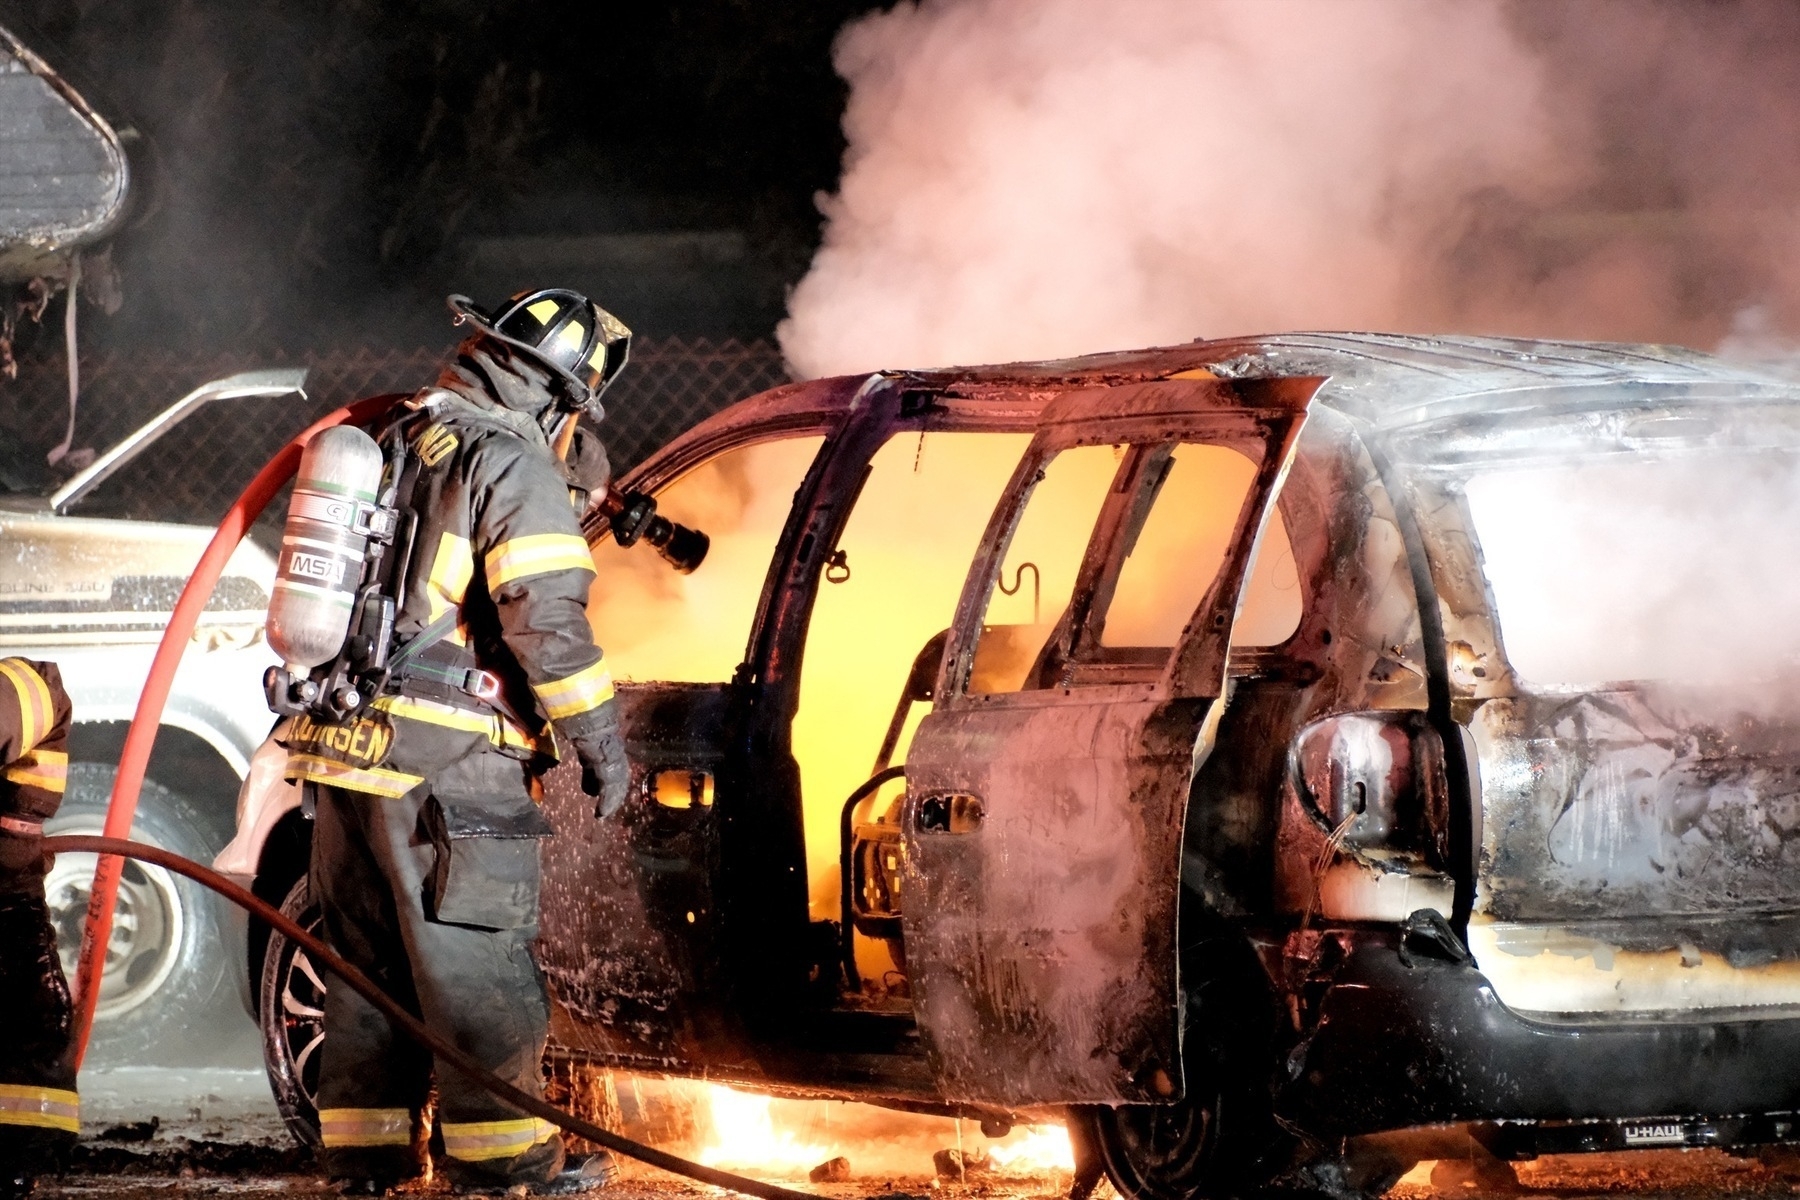 Fire fighter in full respirator equipment with a hose flooding the interior of the car that's on fire. Burning fluids drop below the car, like lava. The car is extremely charred.